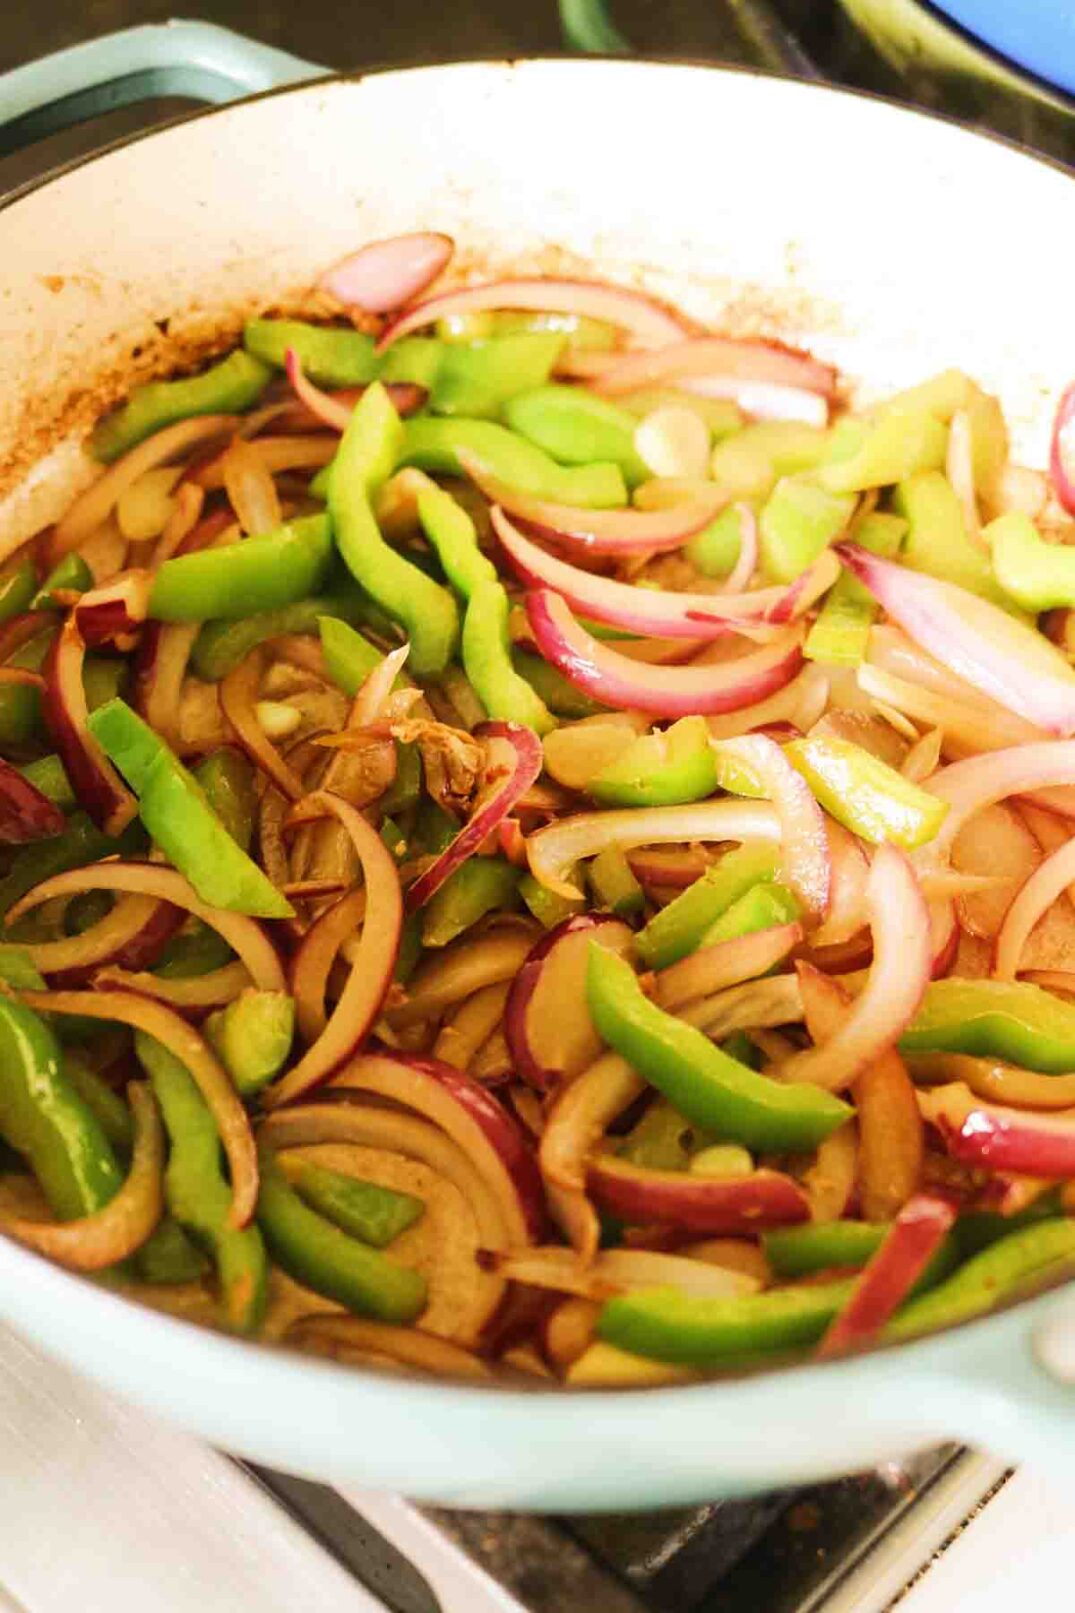 sauteed red onions and green bell peppers cooking together in an enameled cast iron.